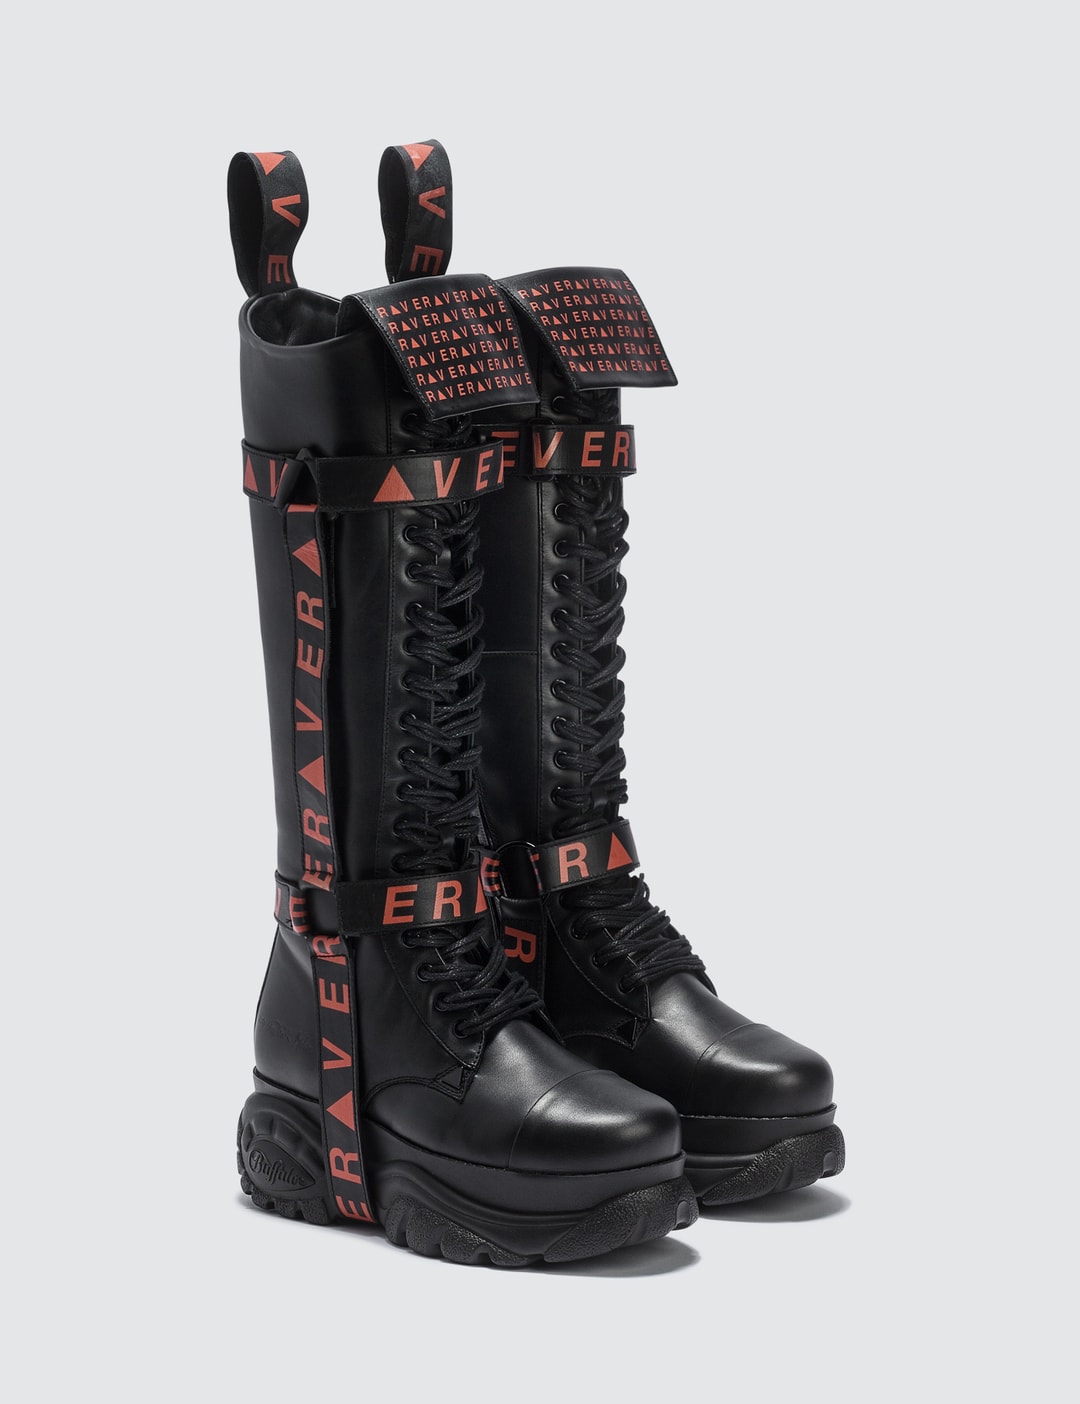 Buffalo London - X Patrick Mohr Rave High Boots | HBX - Globally Curated Fashion and Lifestyle by Hypebeast